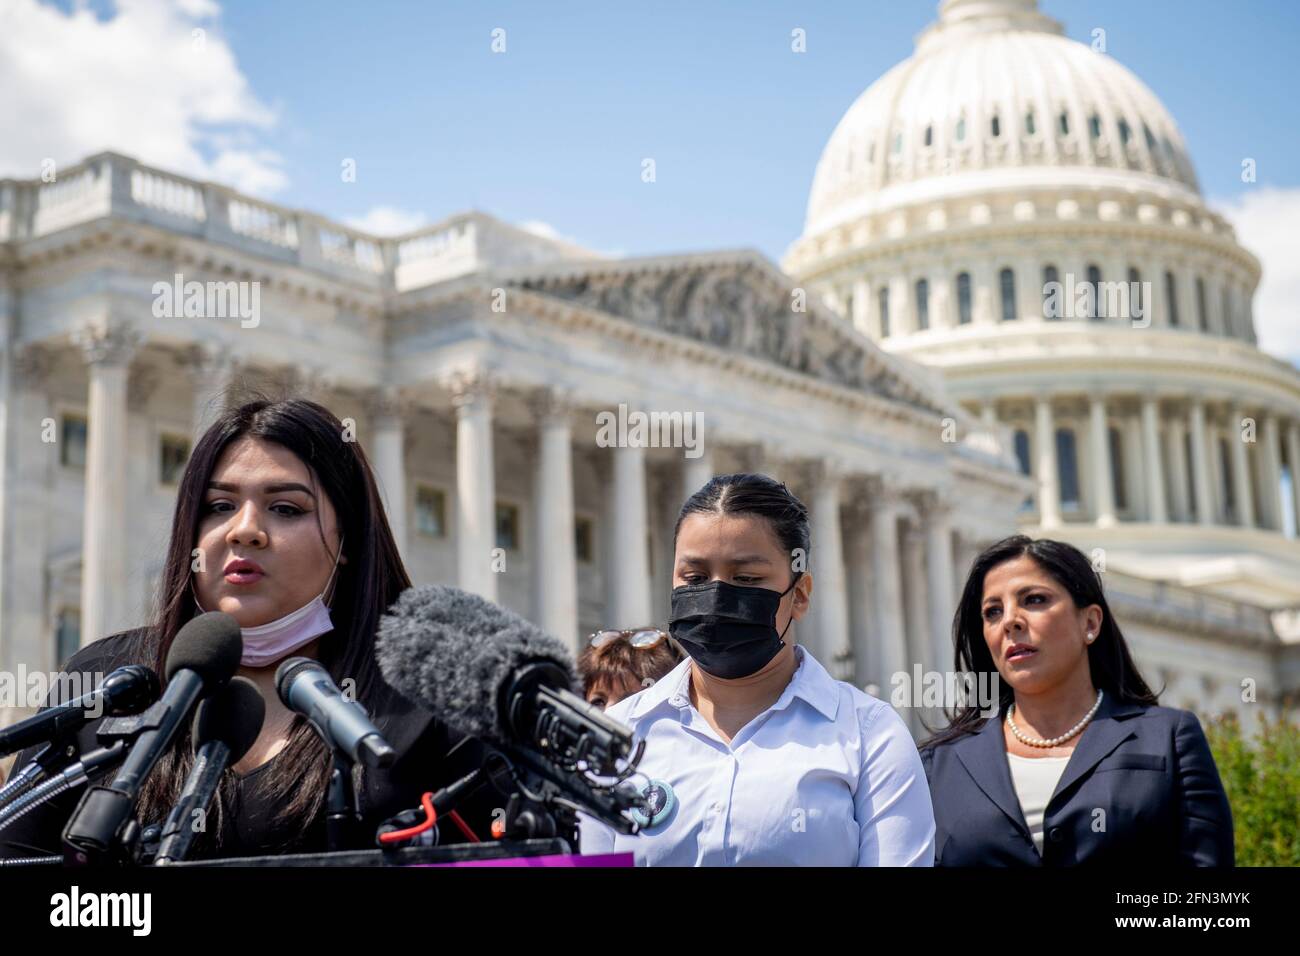 Mayra Guillen, left, and Lupe Guillen, center, sisters of Vanessa Guillen offer remarks during a press conference for the reintroduction of the I am Vanessa Guillén Act, outside the US Capitol in Washington, DC, Thursday, May 13, 2021. The killing of 20 year-old Army Specialist Vanessa Guillen at Fort Hood in Texas last year caused outrage, as Guillen's family said Vanessa was harassed prior to being killed. Credit: Rod Lamkey/CNP /MediaPunch Stock Photo